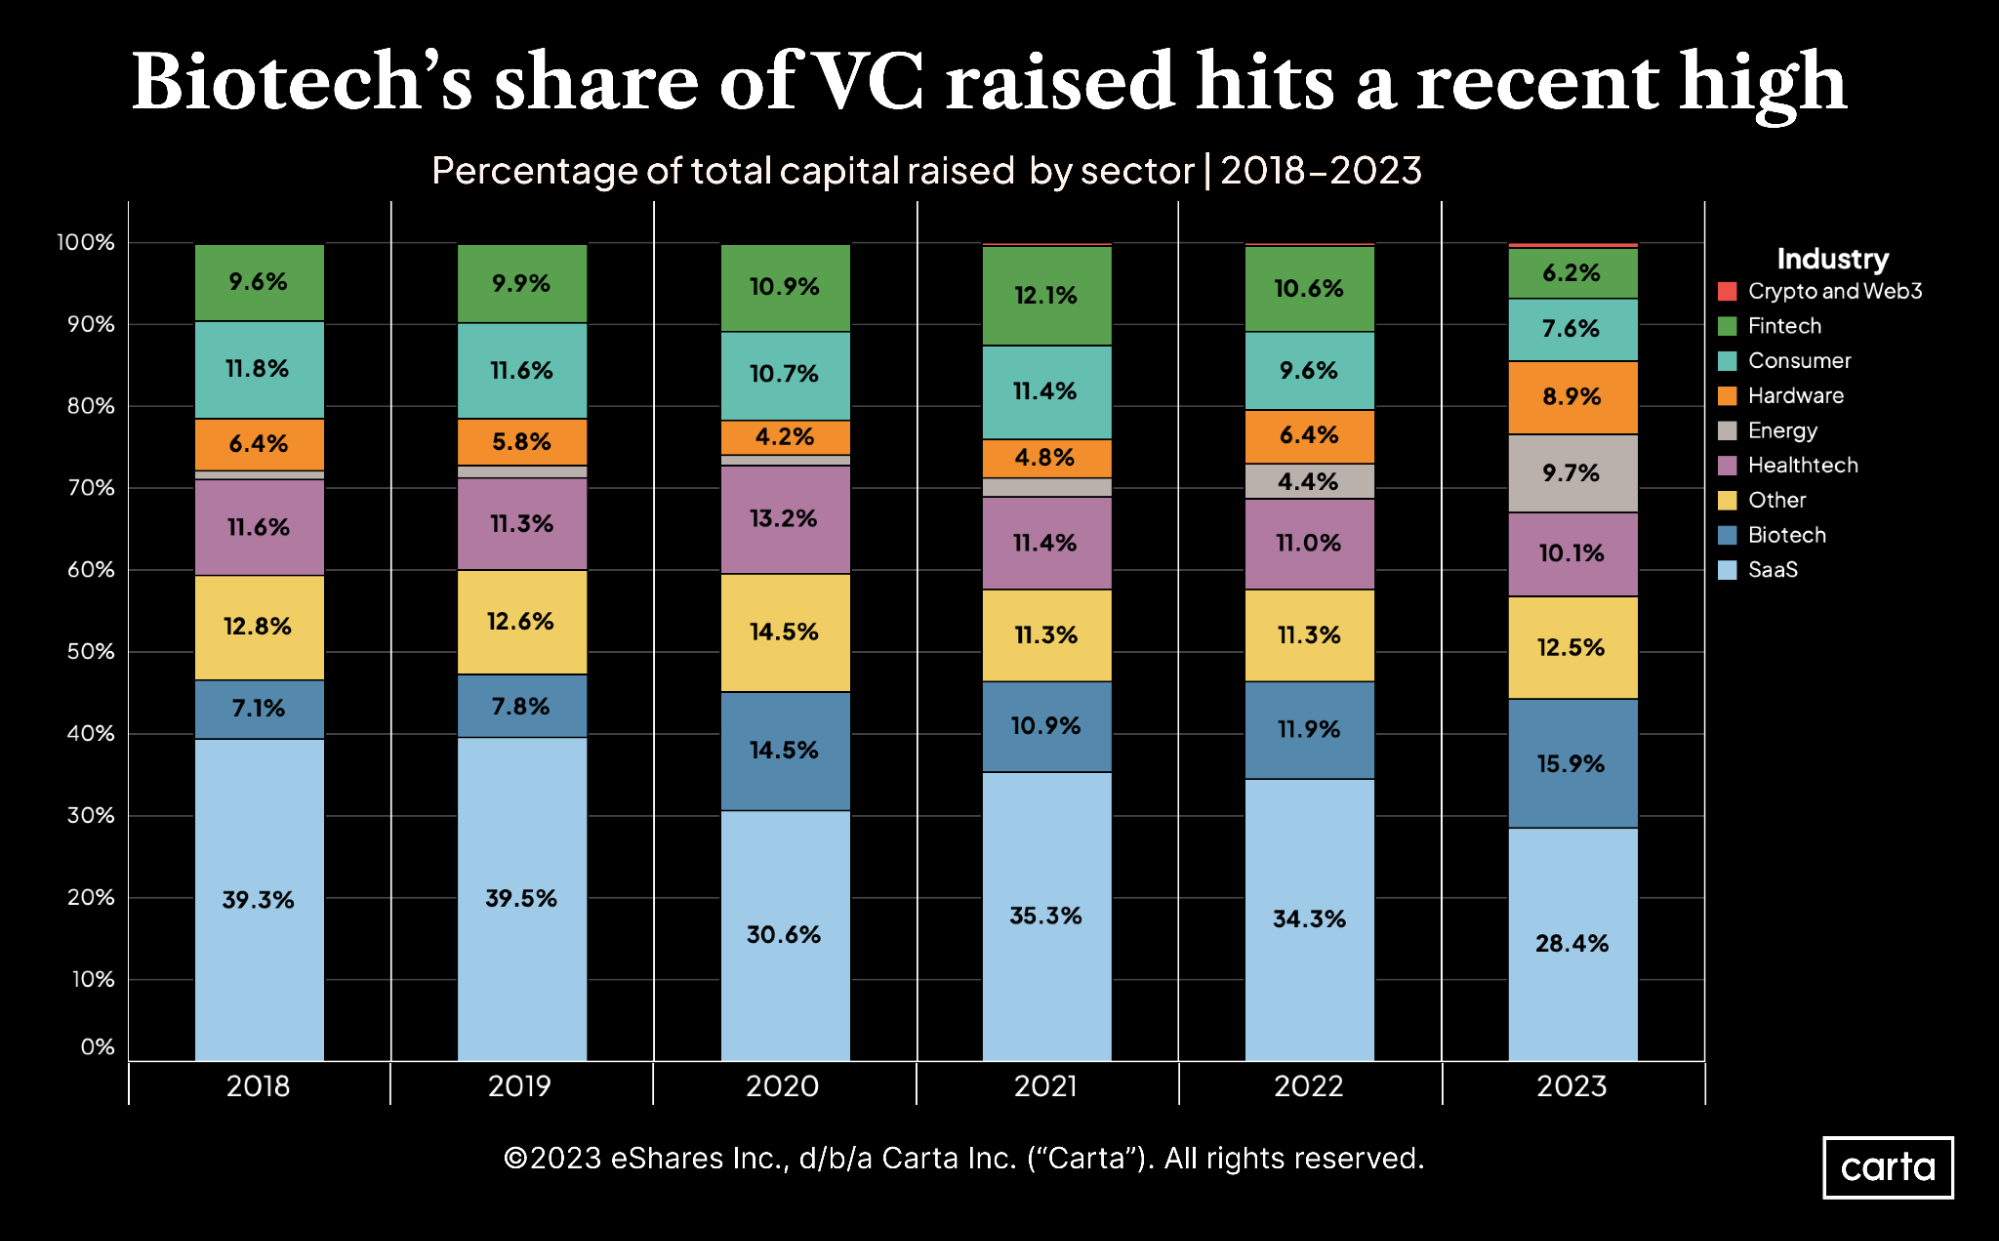 Biotech's share of VC raised hits a recent high